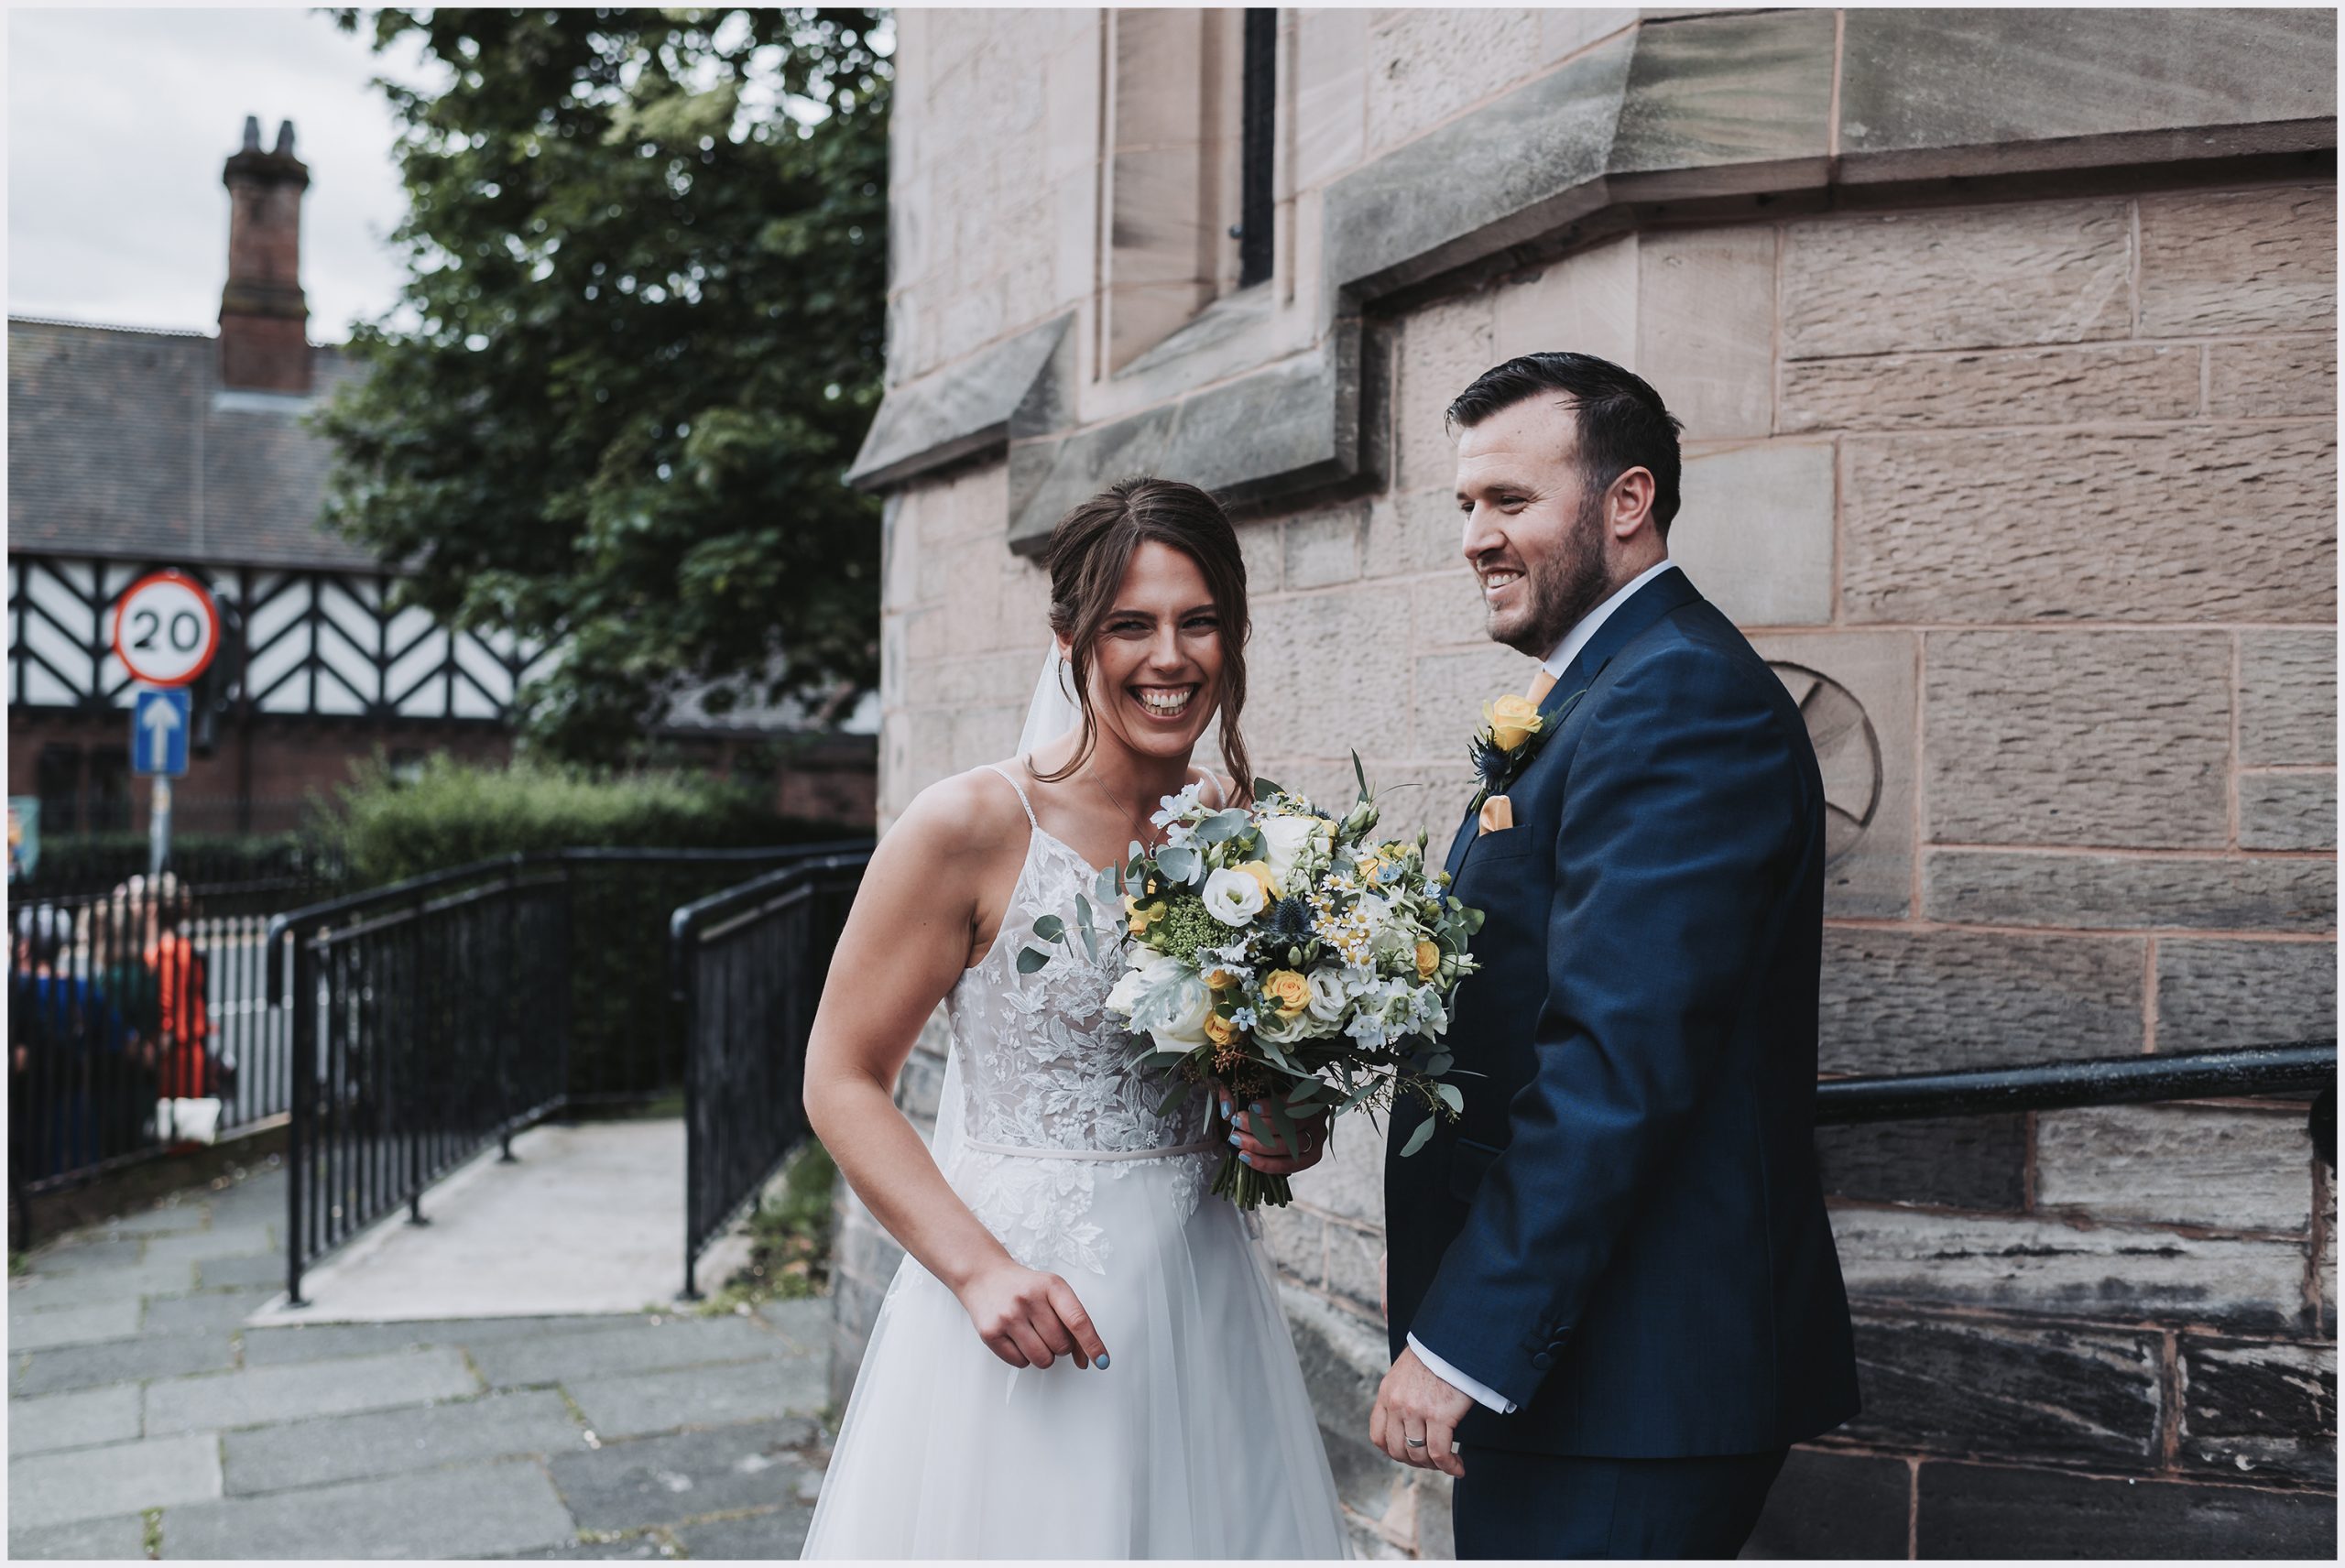 A bride and groom smile and joke outside the church where they have just got married in Chester.  Image captured by north Wales wedding photographer Helena Jayne Photography